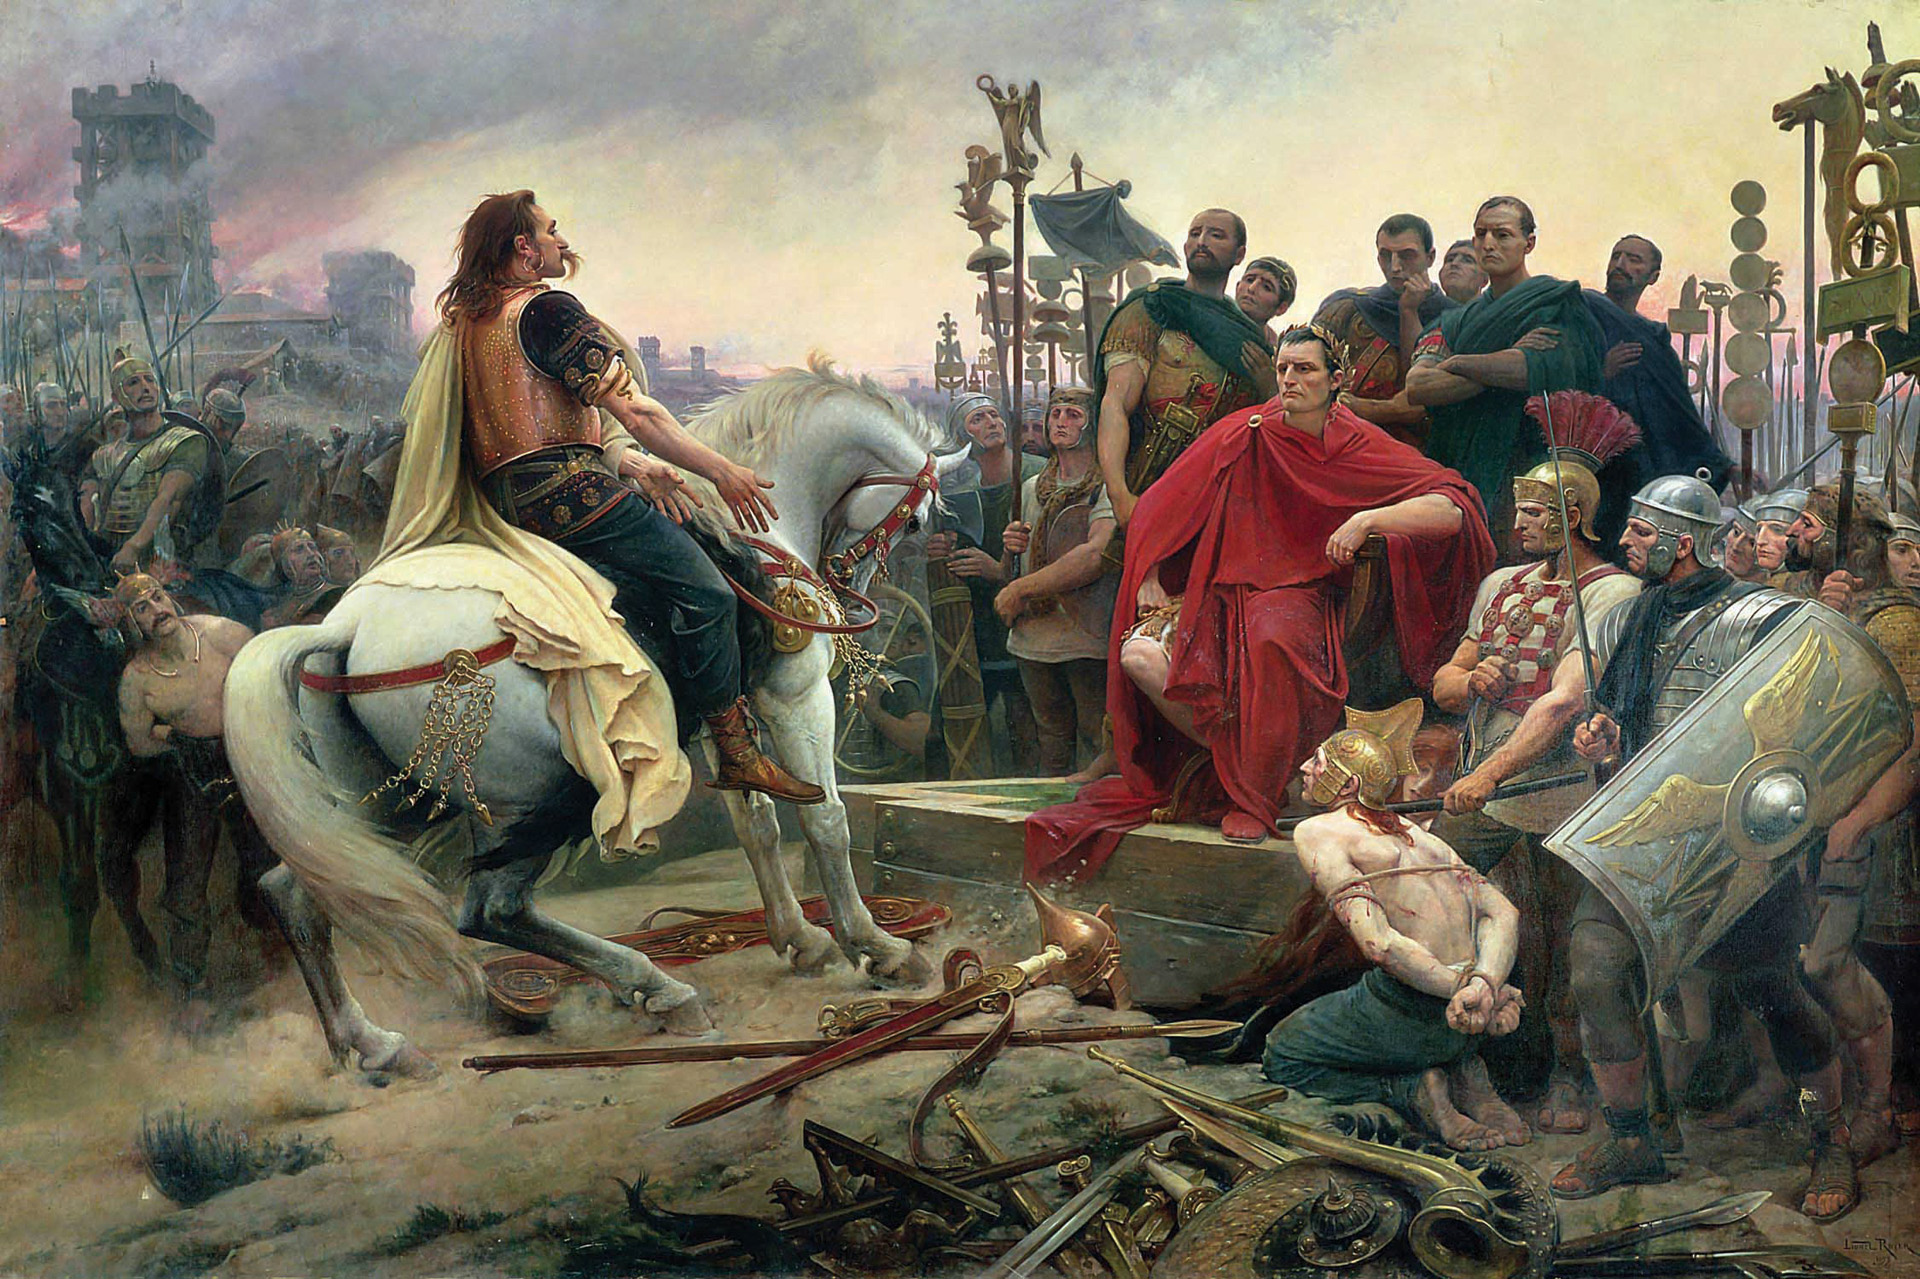 Vercingetorix is depicted as a gallant hero in a romantic painting by French painter Lionel-Noel Royer. The leader of the Gallic rebellion was held for five years in Rome so that he could be displayed in Caesar’s triumph.